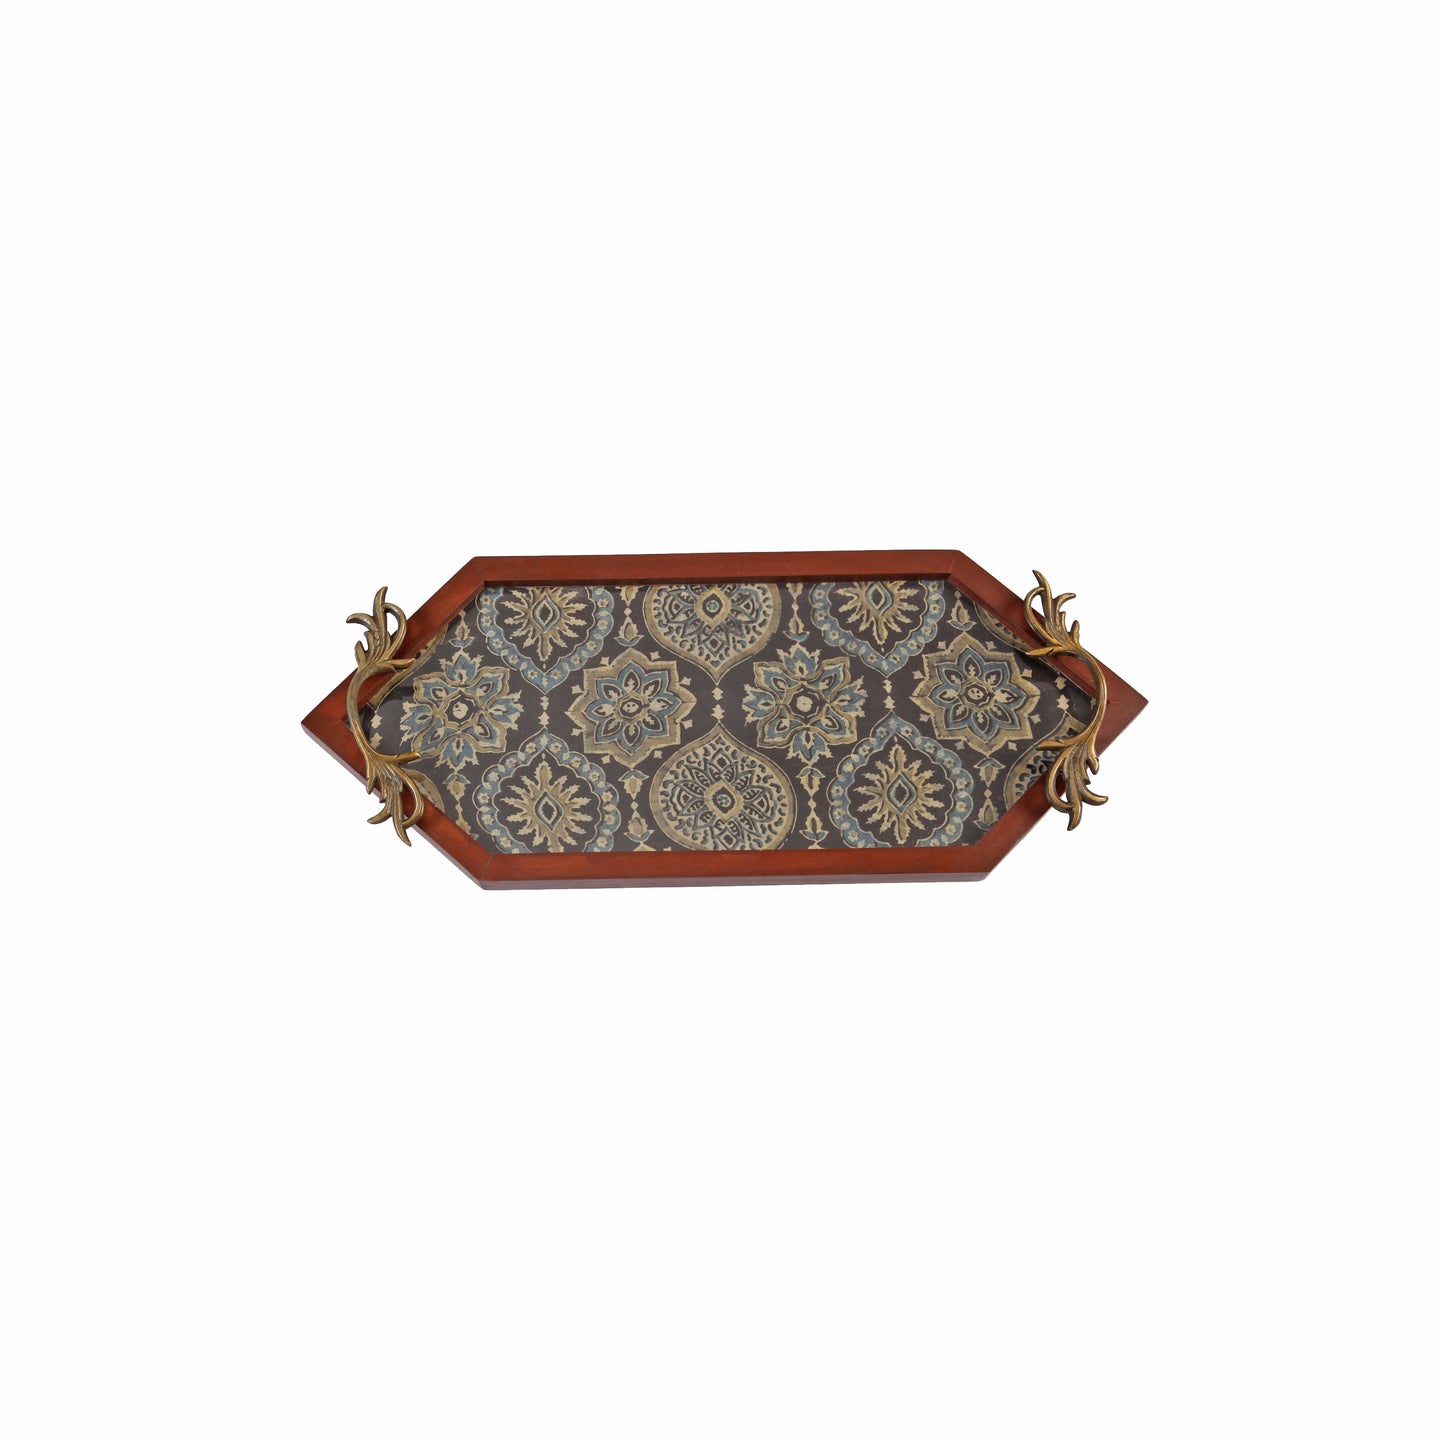 A Tiny Mistake Diamond Shaped Blue Modal Pattern Teak Serving Tray with Brass Handle, Tray for Serving Tea and Snacks, 49 x 20 x 2 cm